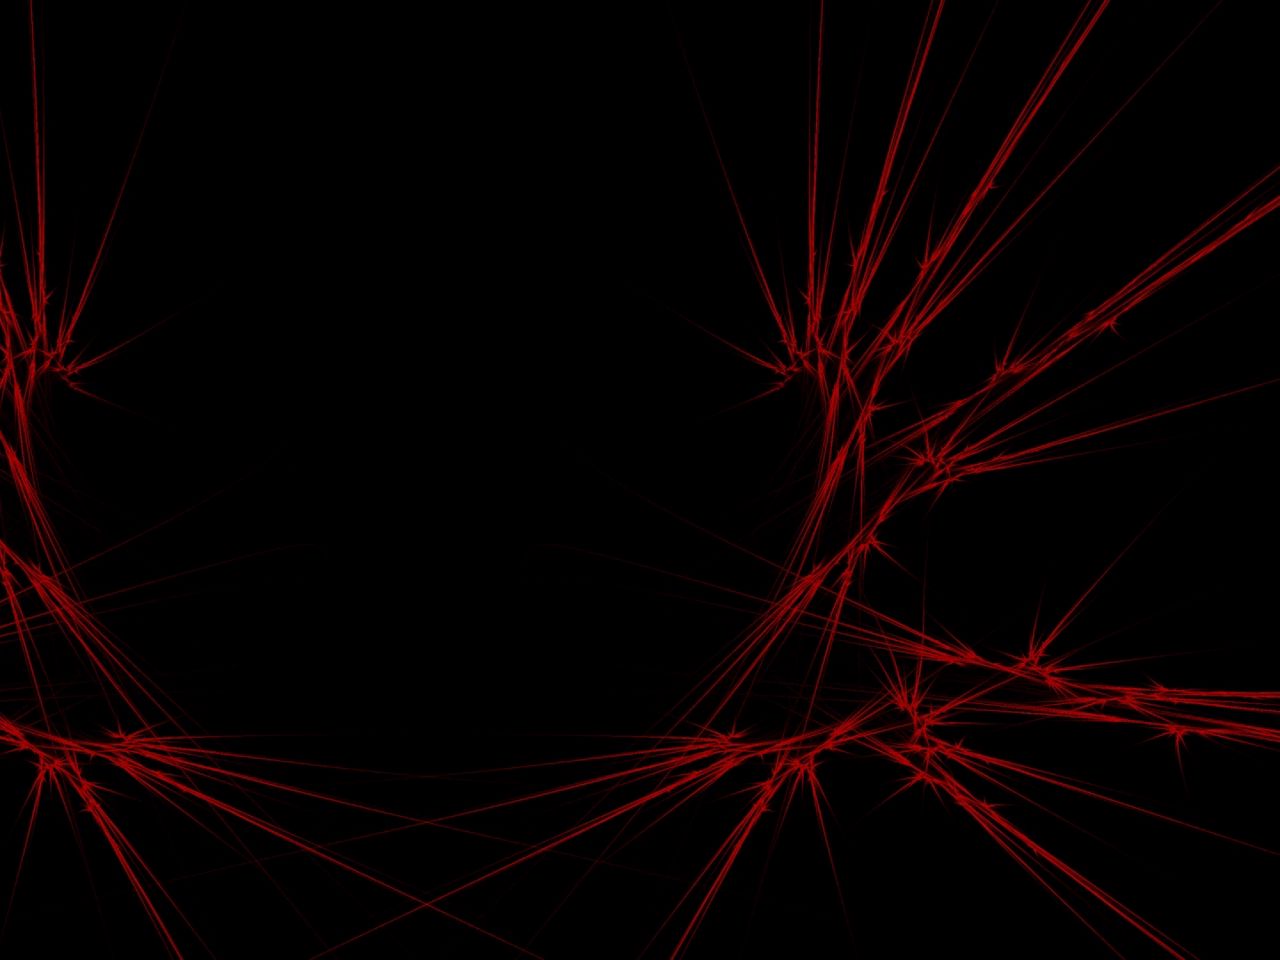 Download wallpaper 1280x960 red, black, abstract standard 4:3 hd background